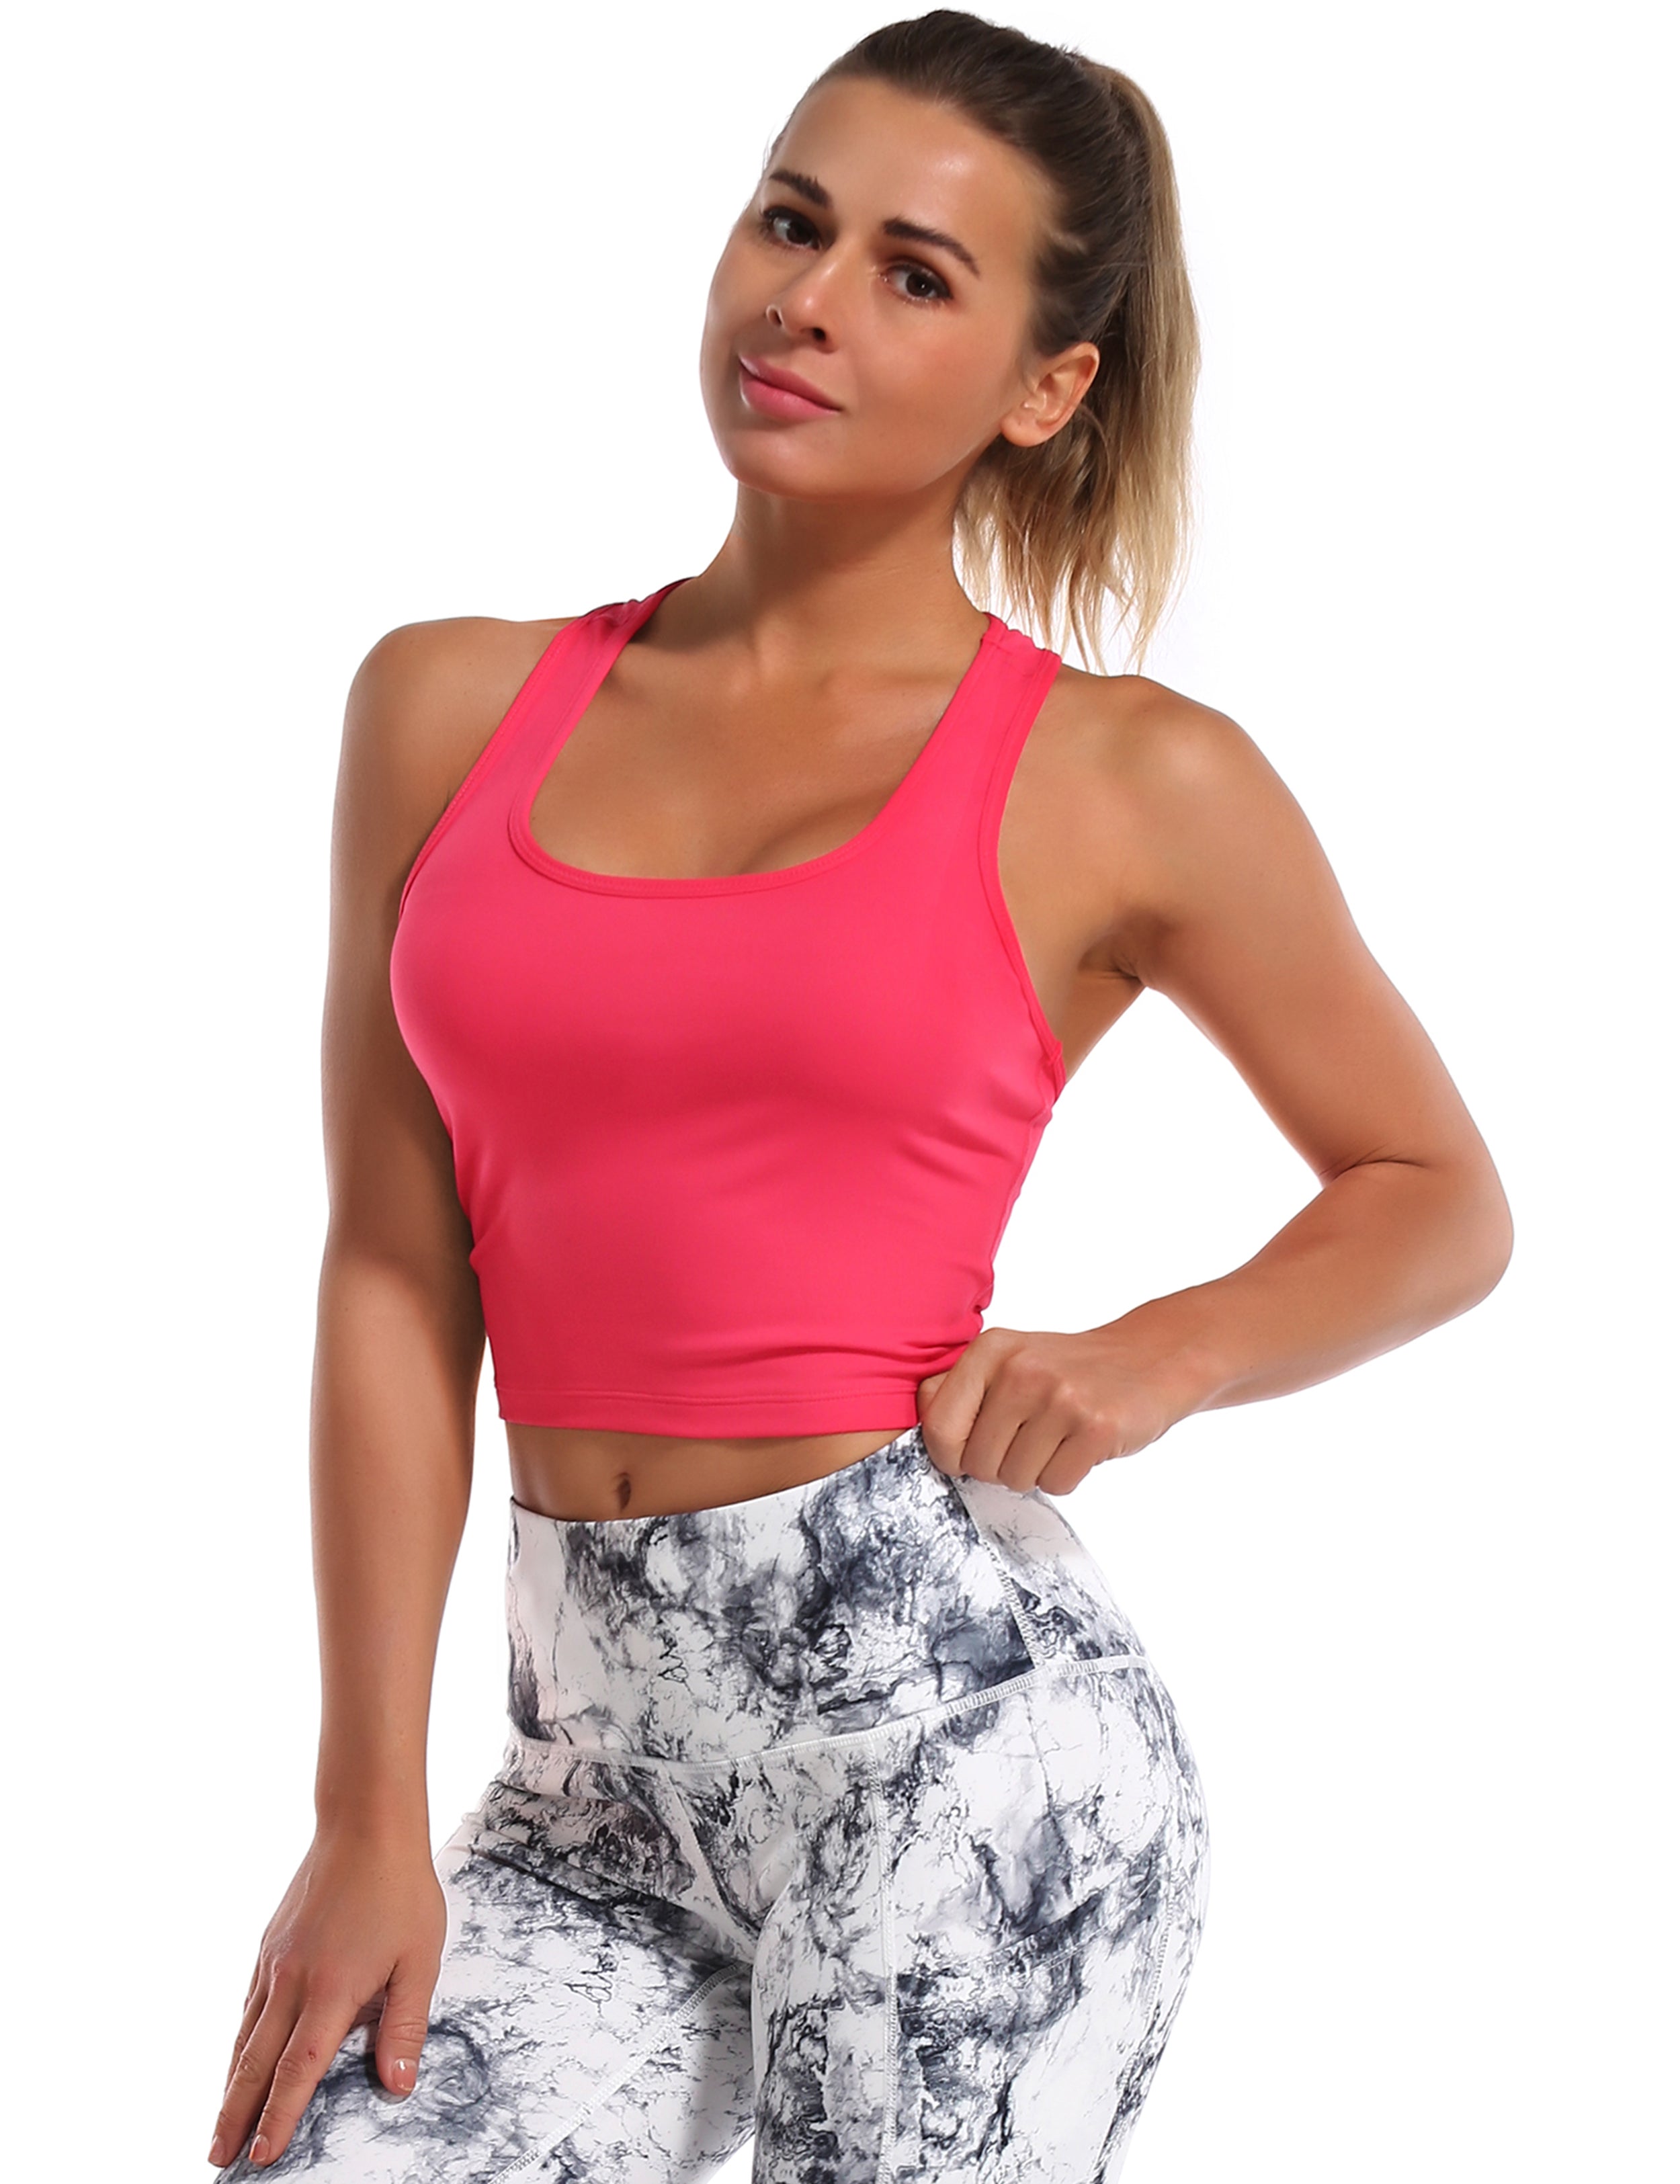 Racerback Athletic Crop Tank Tops red 92%Nylon/8%Spandex(Cotton Soft) Designed for Pilates Tight Fit So buttery soft, it feels weightless Sweat-wicking Four-way stretch Breathable Contours your body Sits below the waistband for moderate, everyday coverage